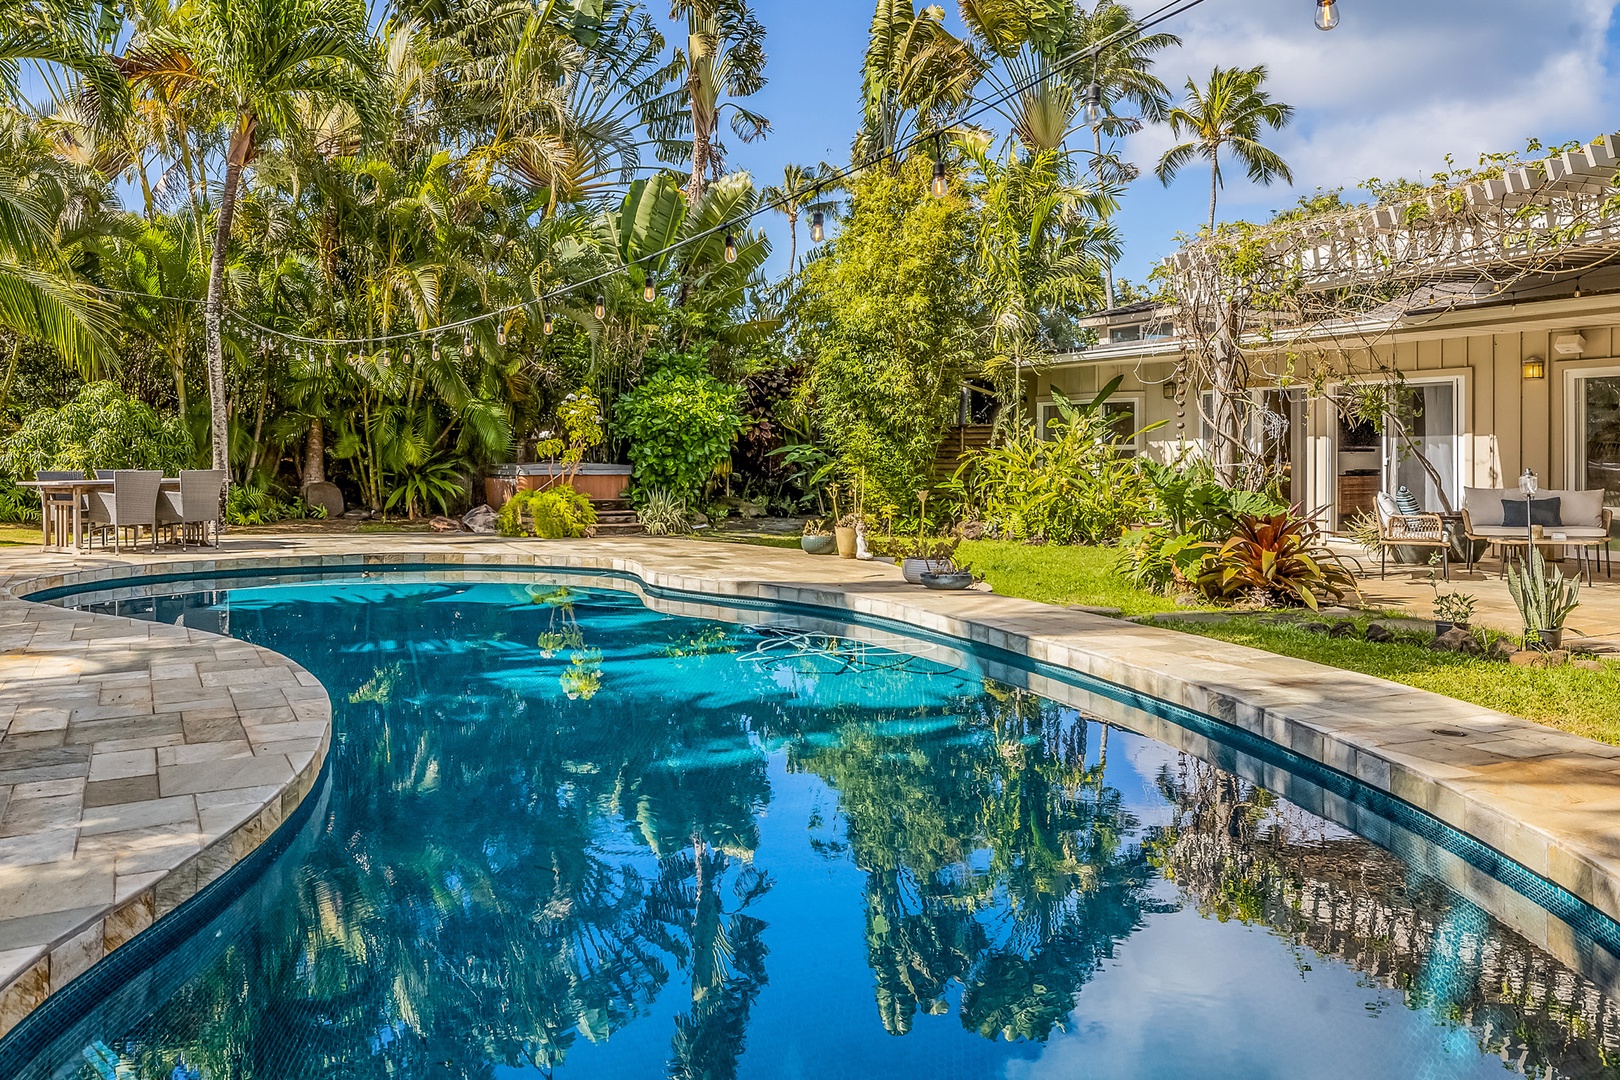 Honolulu Vacation Rentals, Hale Ho'omaha - This private pool serves as your island oasis